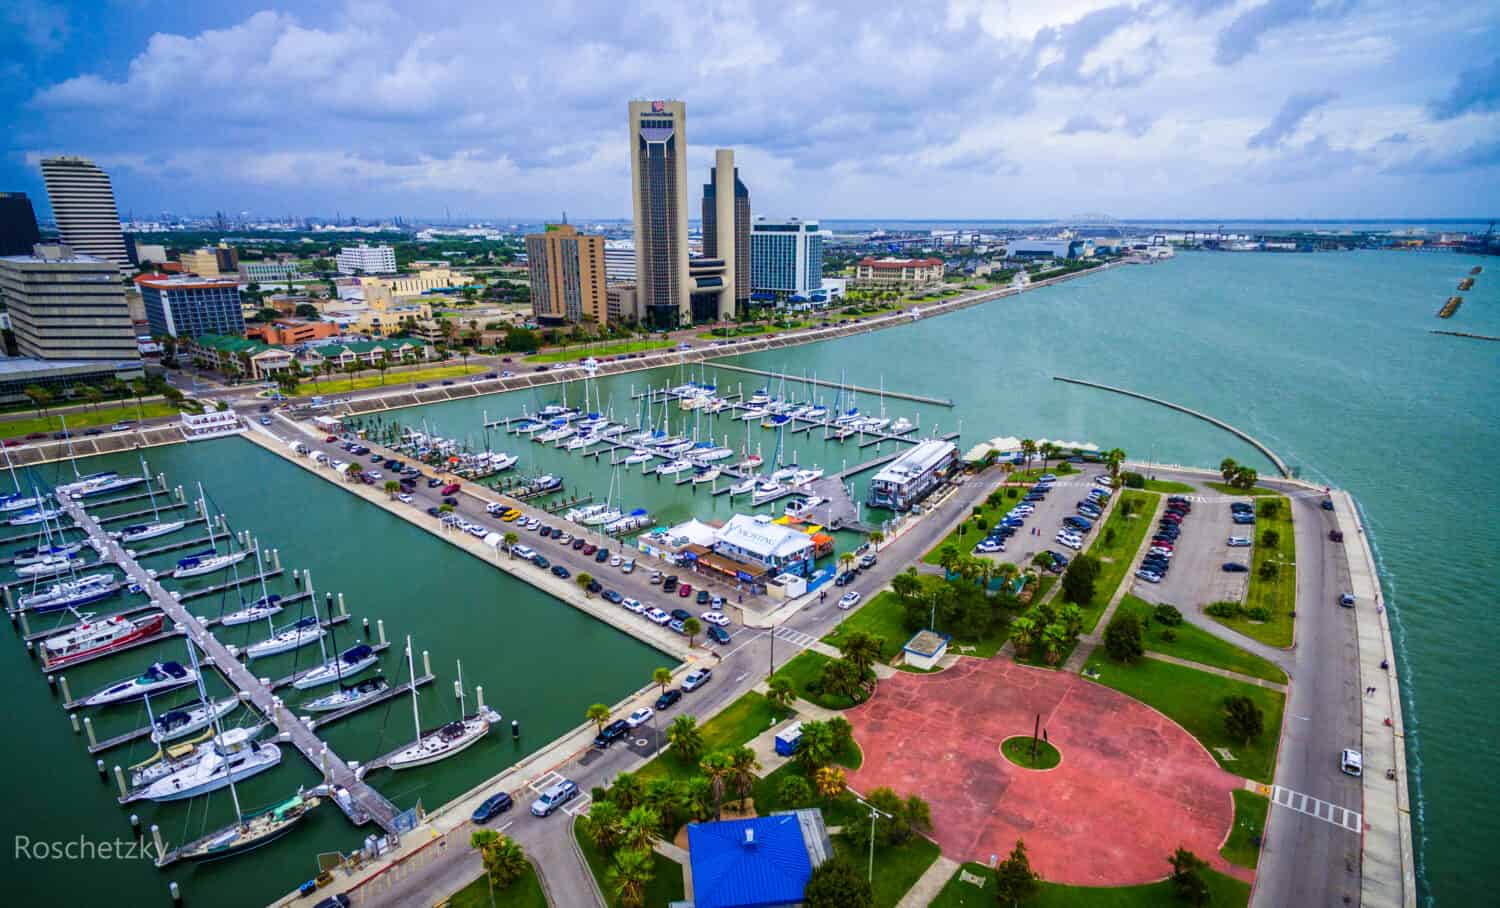 Corpus Christi Texas Skyline view of City harbor bridge in background with many rows of piers filled with boats and sailboats and yachts across the summer vacation landmark getaway